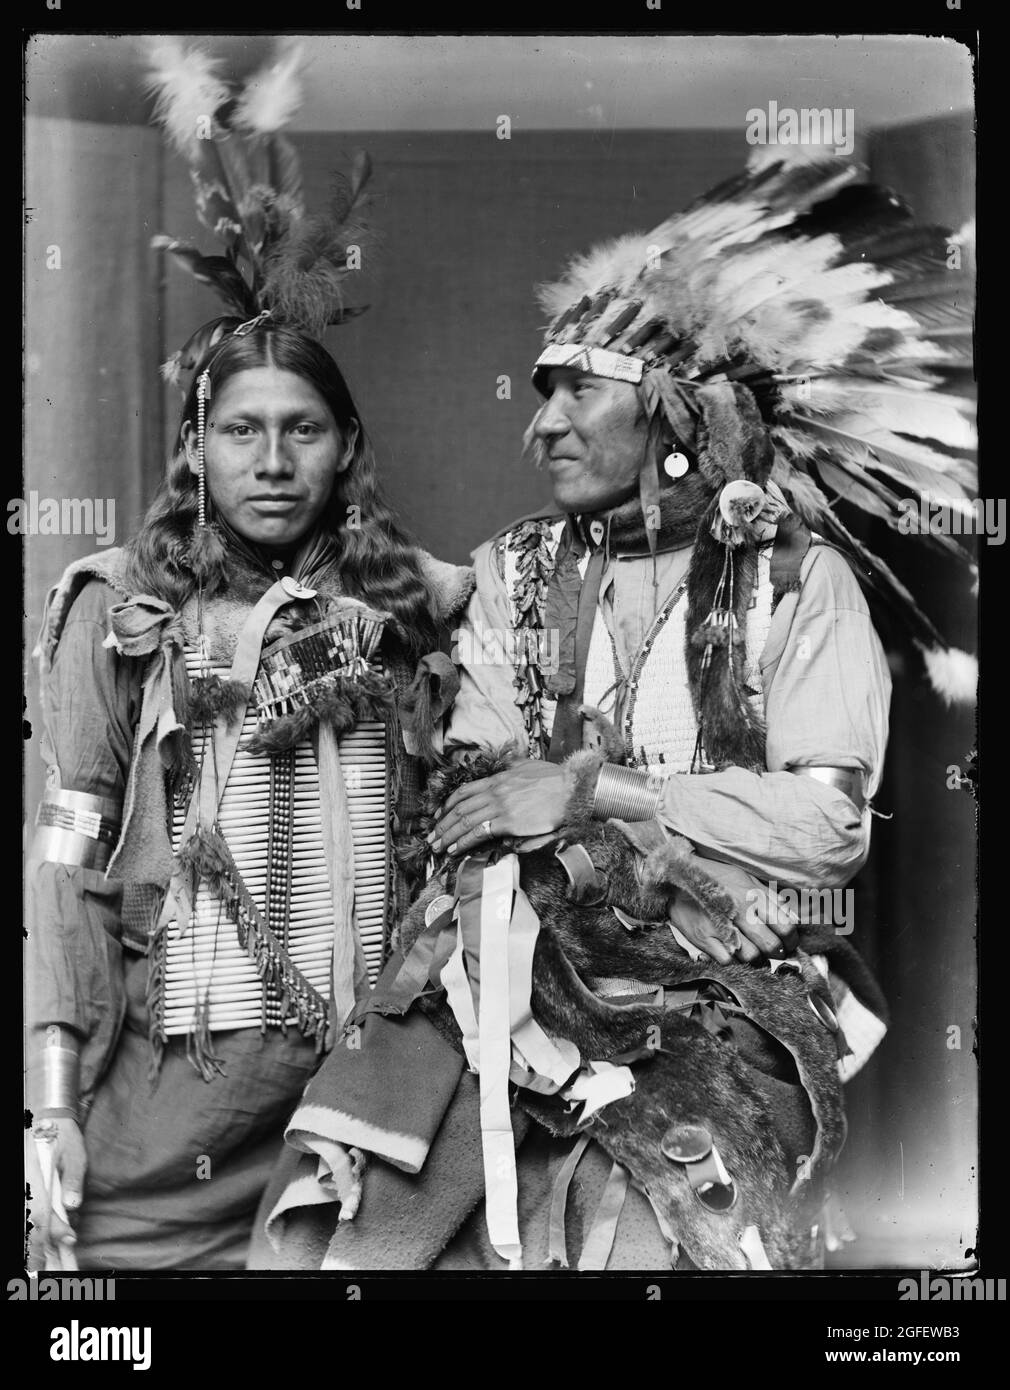 Holy Fro- left and Big Turnips, native americans / American Indians. probably members of Buffalo Bill's Wild West Show. C 1900. Stock Photo